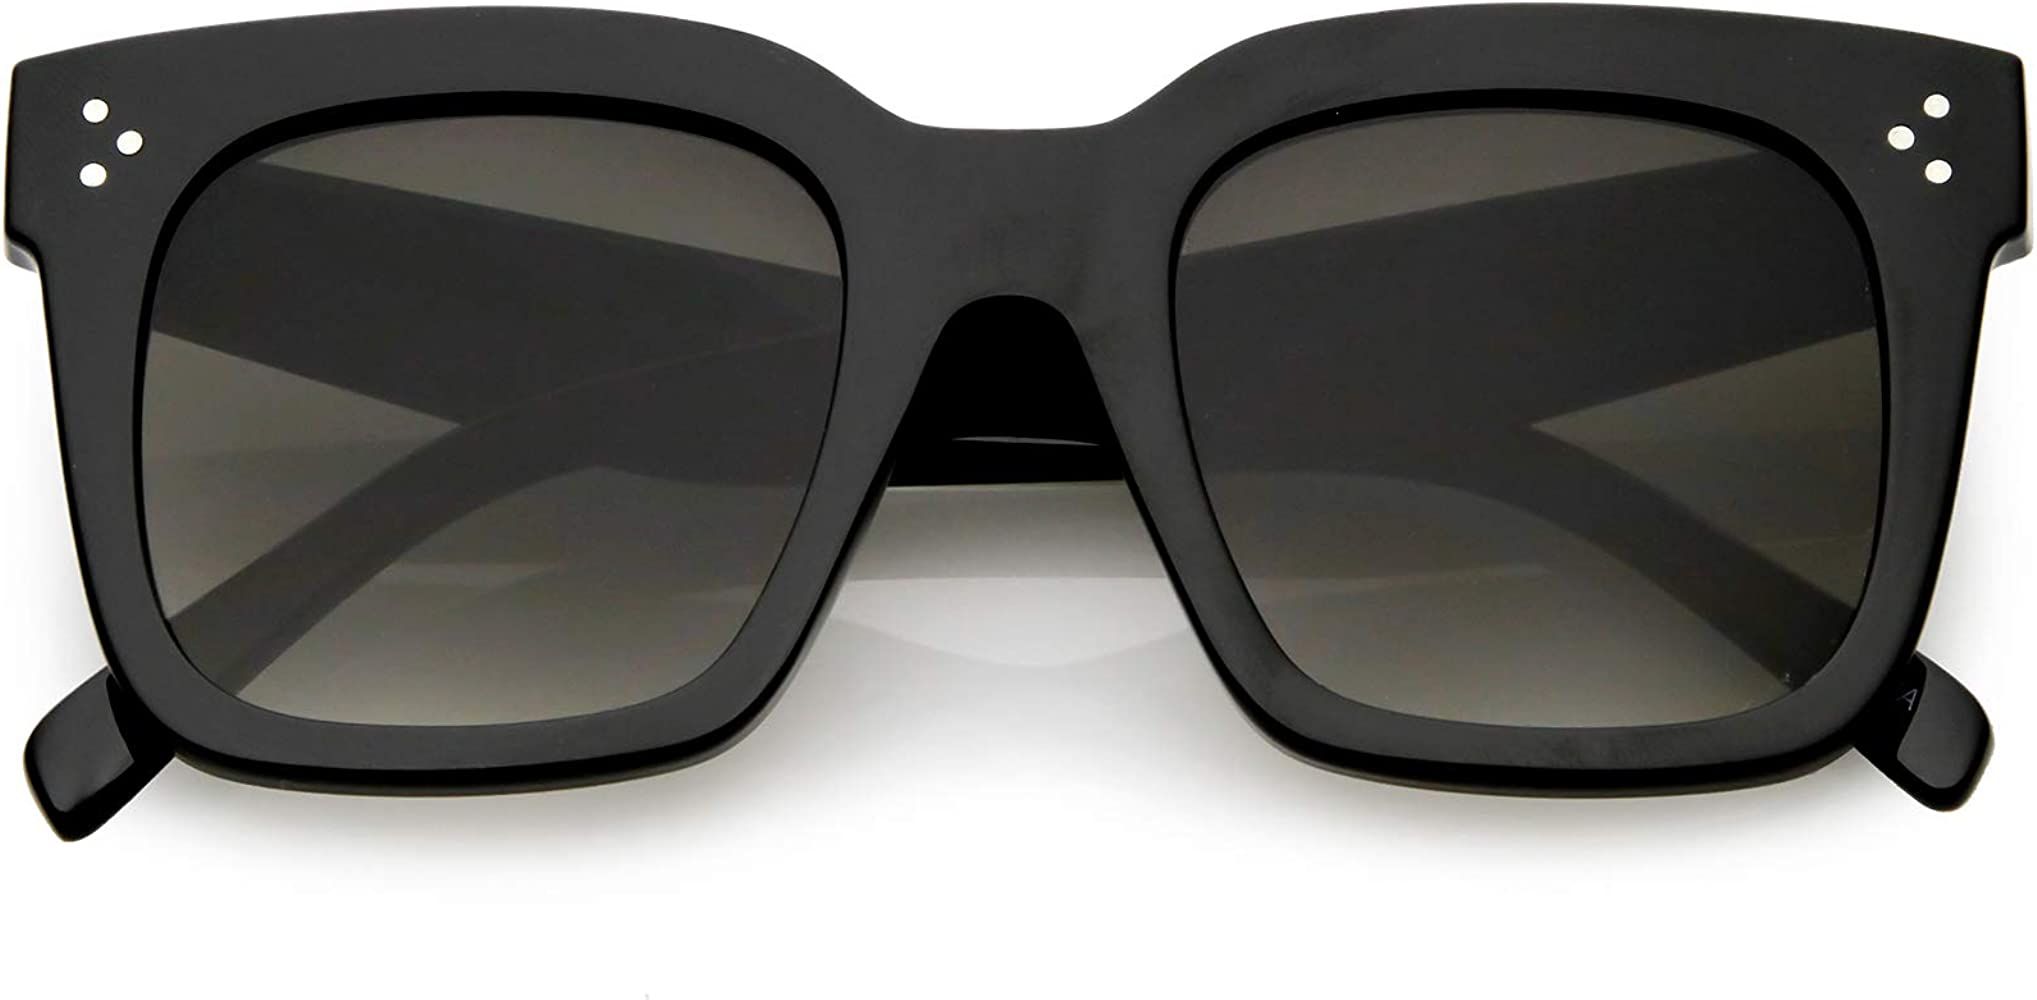 Retro Oversized Square Sunglasses for Women with Flat Lens 50mm | Amazon (US)